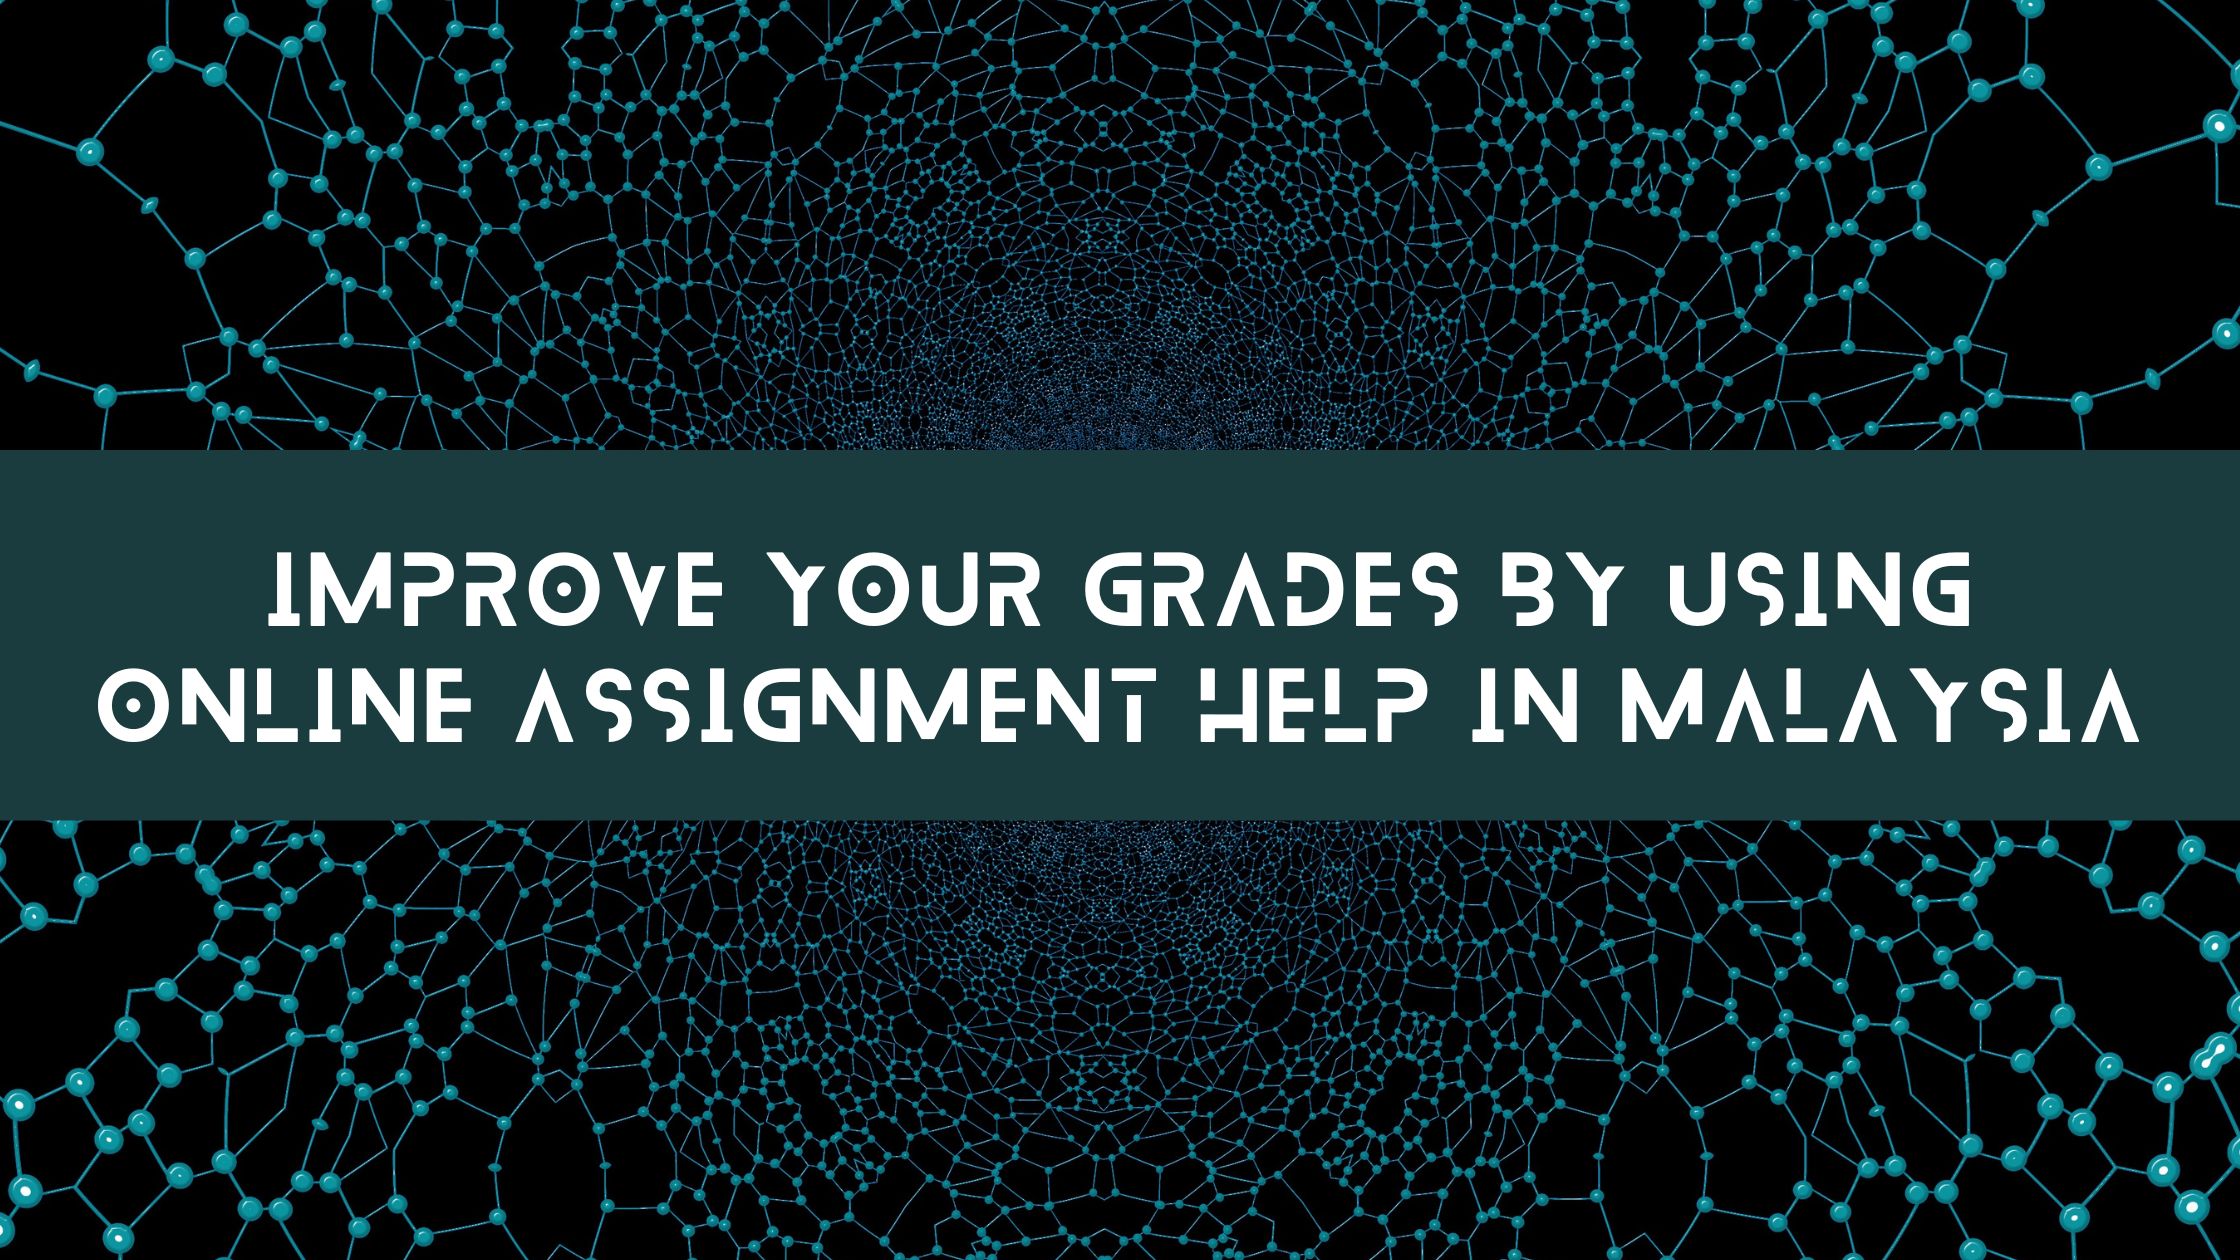 Improve Your Grades by Using Online Assignment Help in Malaysia